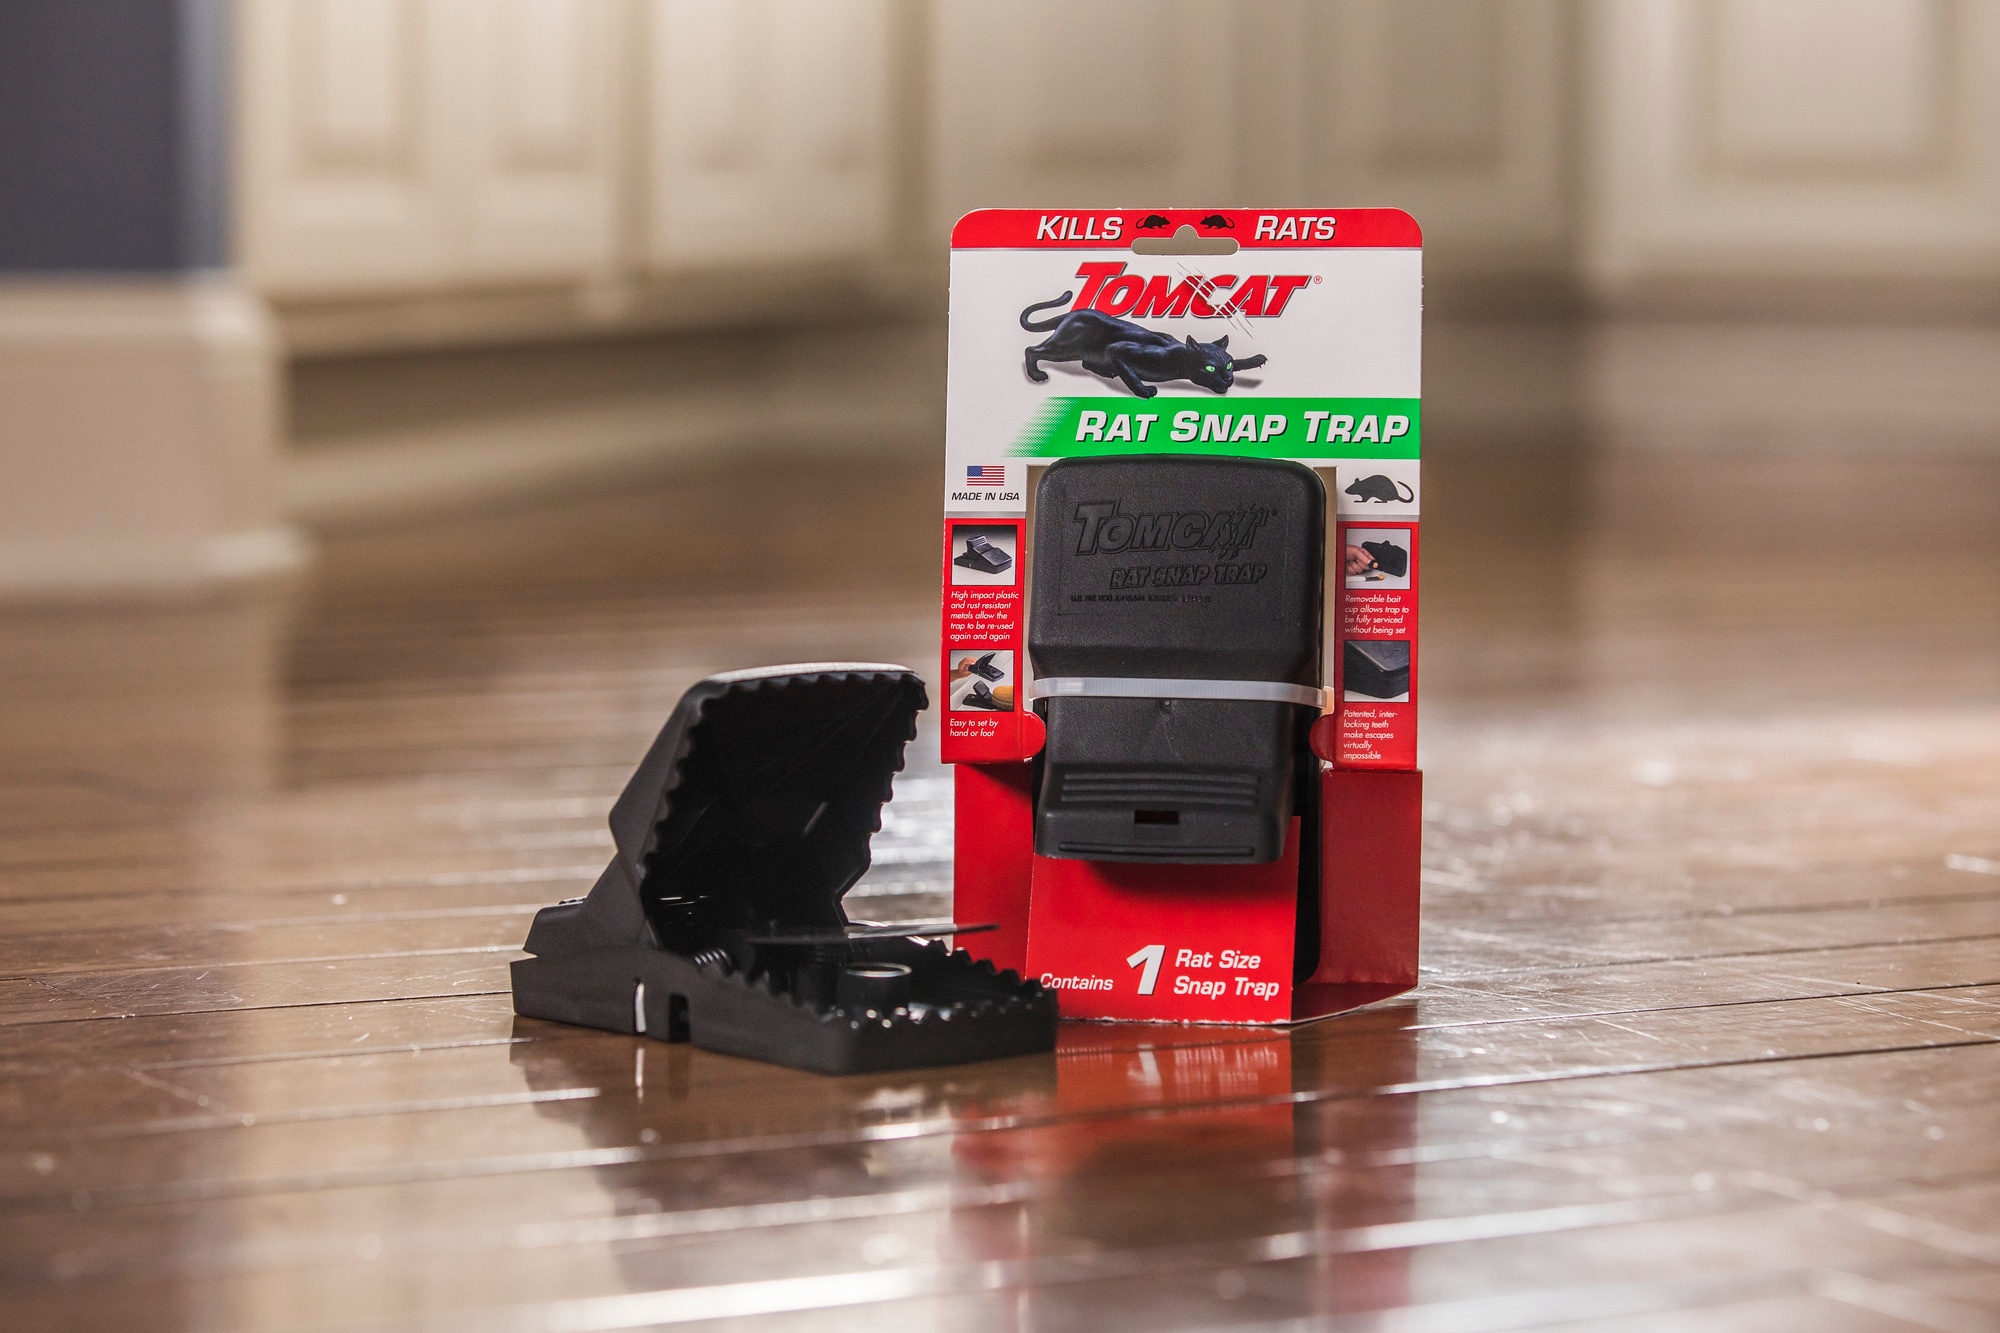 Tomcat Snap Mouse Trap - CountryMax